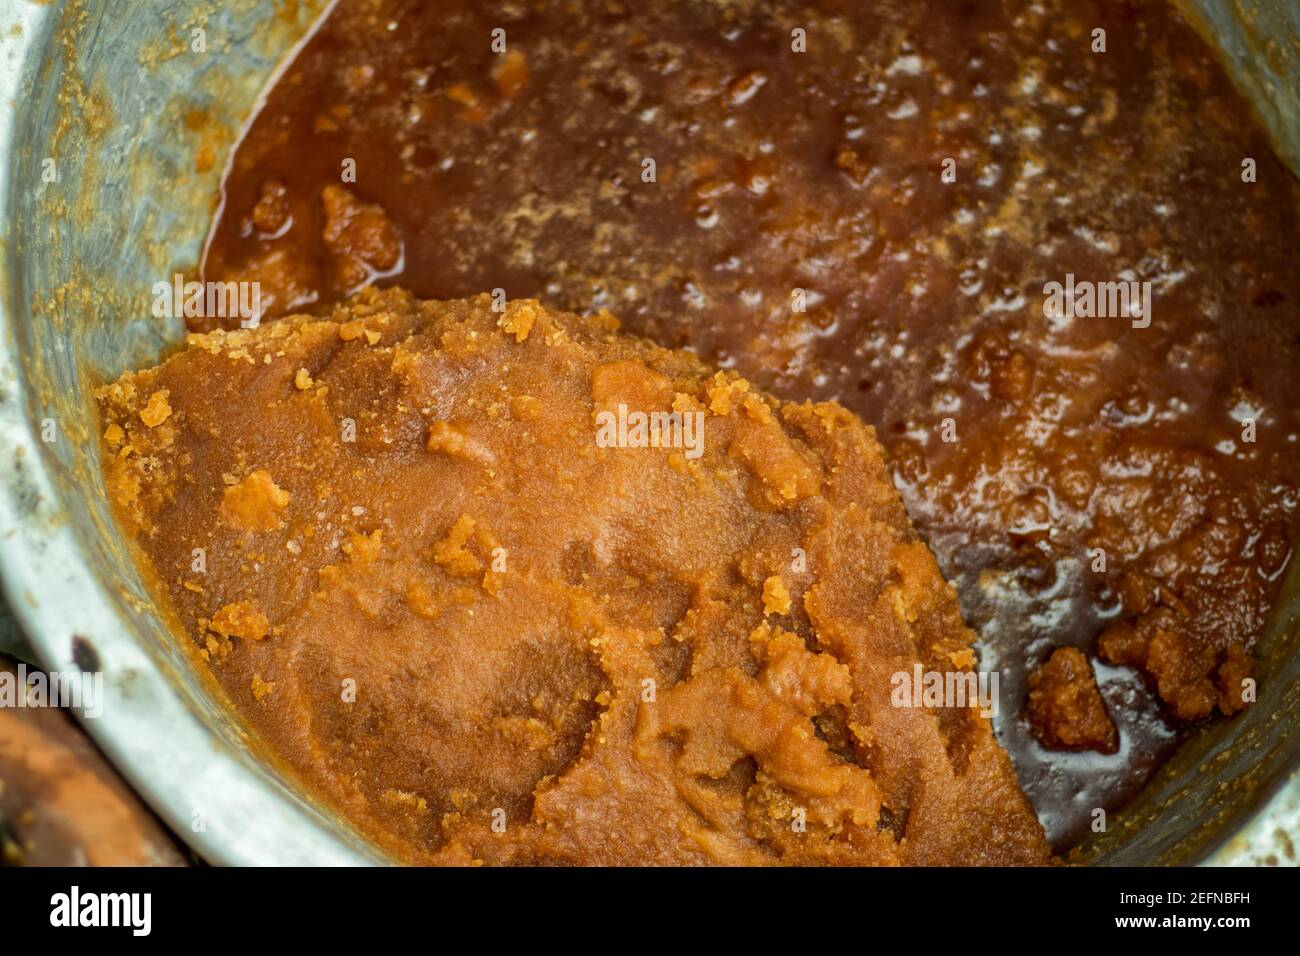 Molasses with sugarcane or stacks of raw Colombian Panela, or unrefined whole cane sugar or Sugarcane molasses Stock Photo